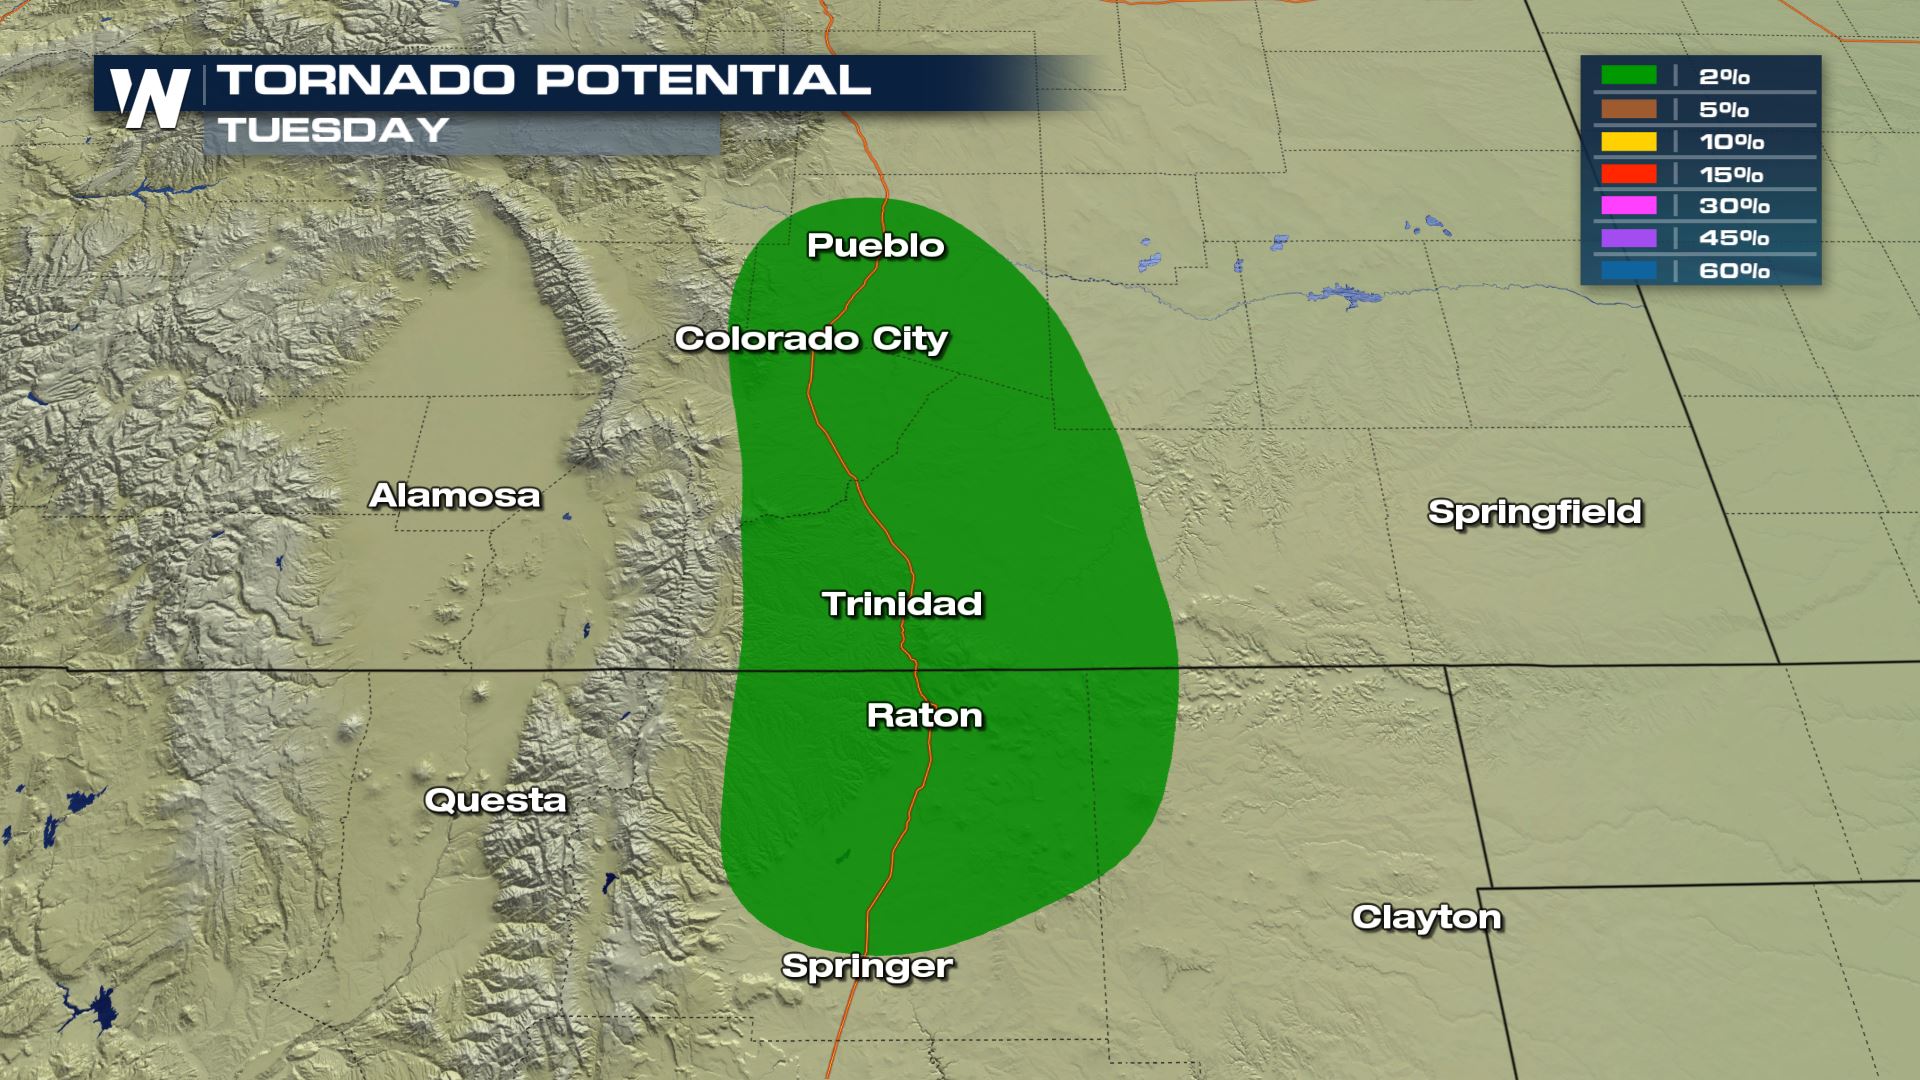 More Severe Storms Tuesday for Colorado and New Mexico